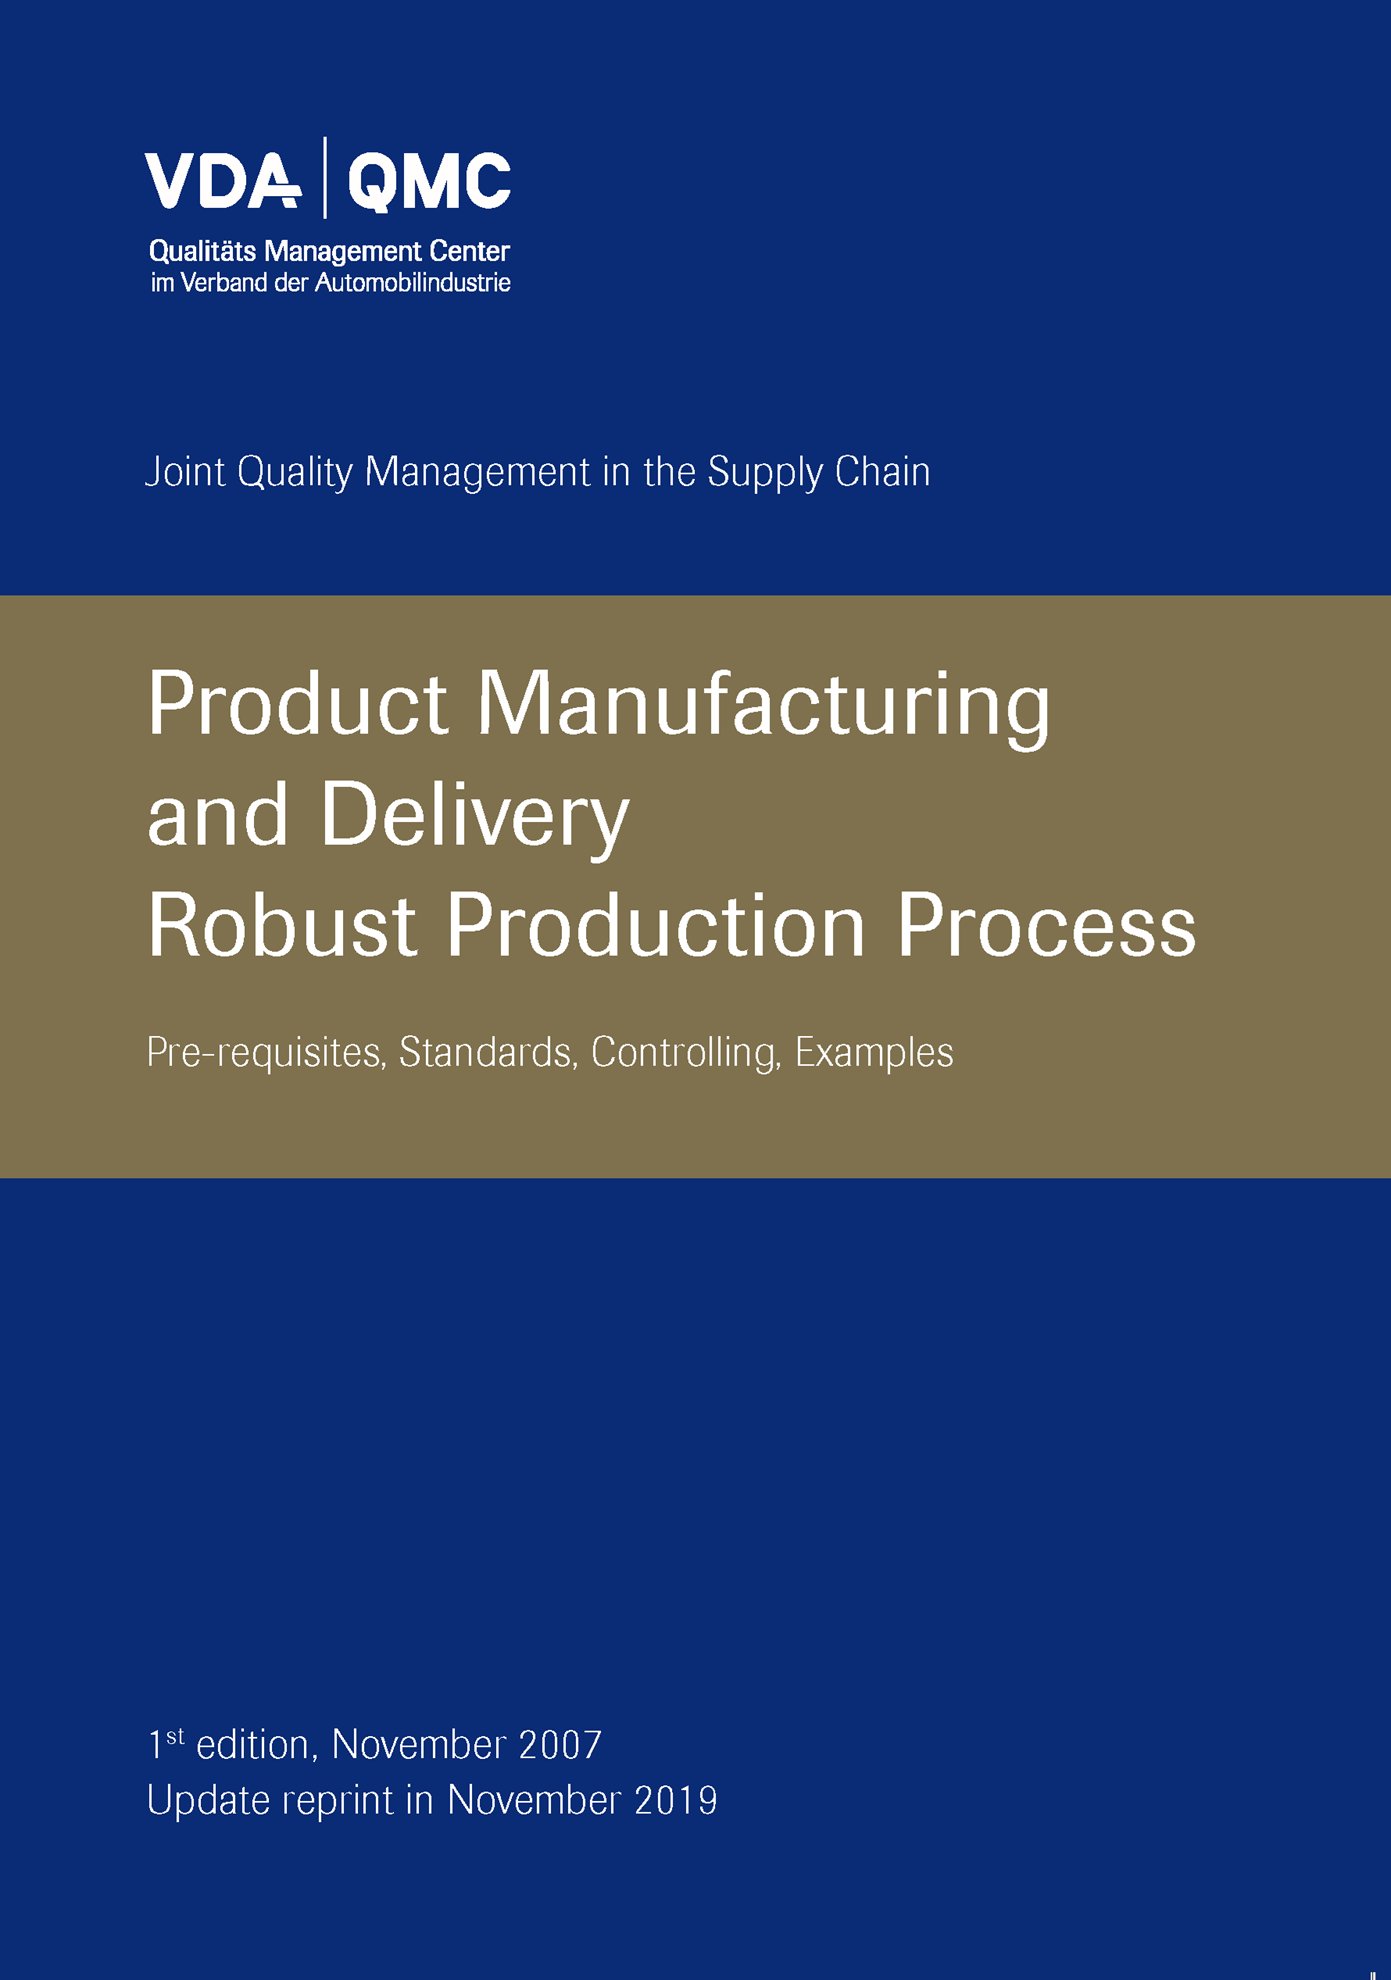 Publikation  VDA Product Manufacturing and Delivery
 · Robust Production Process
 Prerequisites, Standards, Controlling, Examples
 1st edition November 2007 - Updated reprint, November 2019 1.11.2019 Ansicht